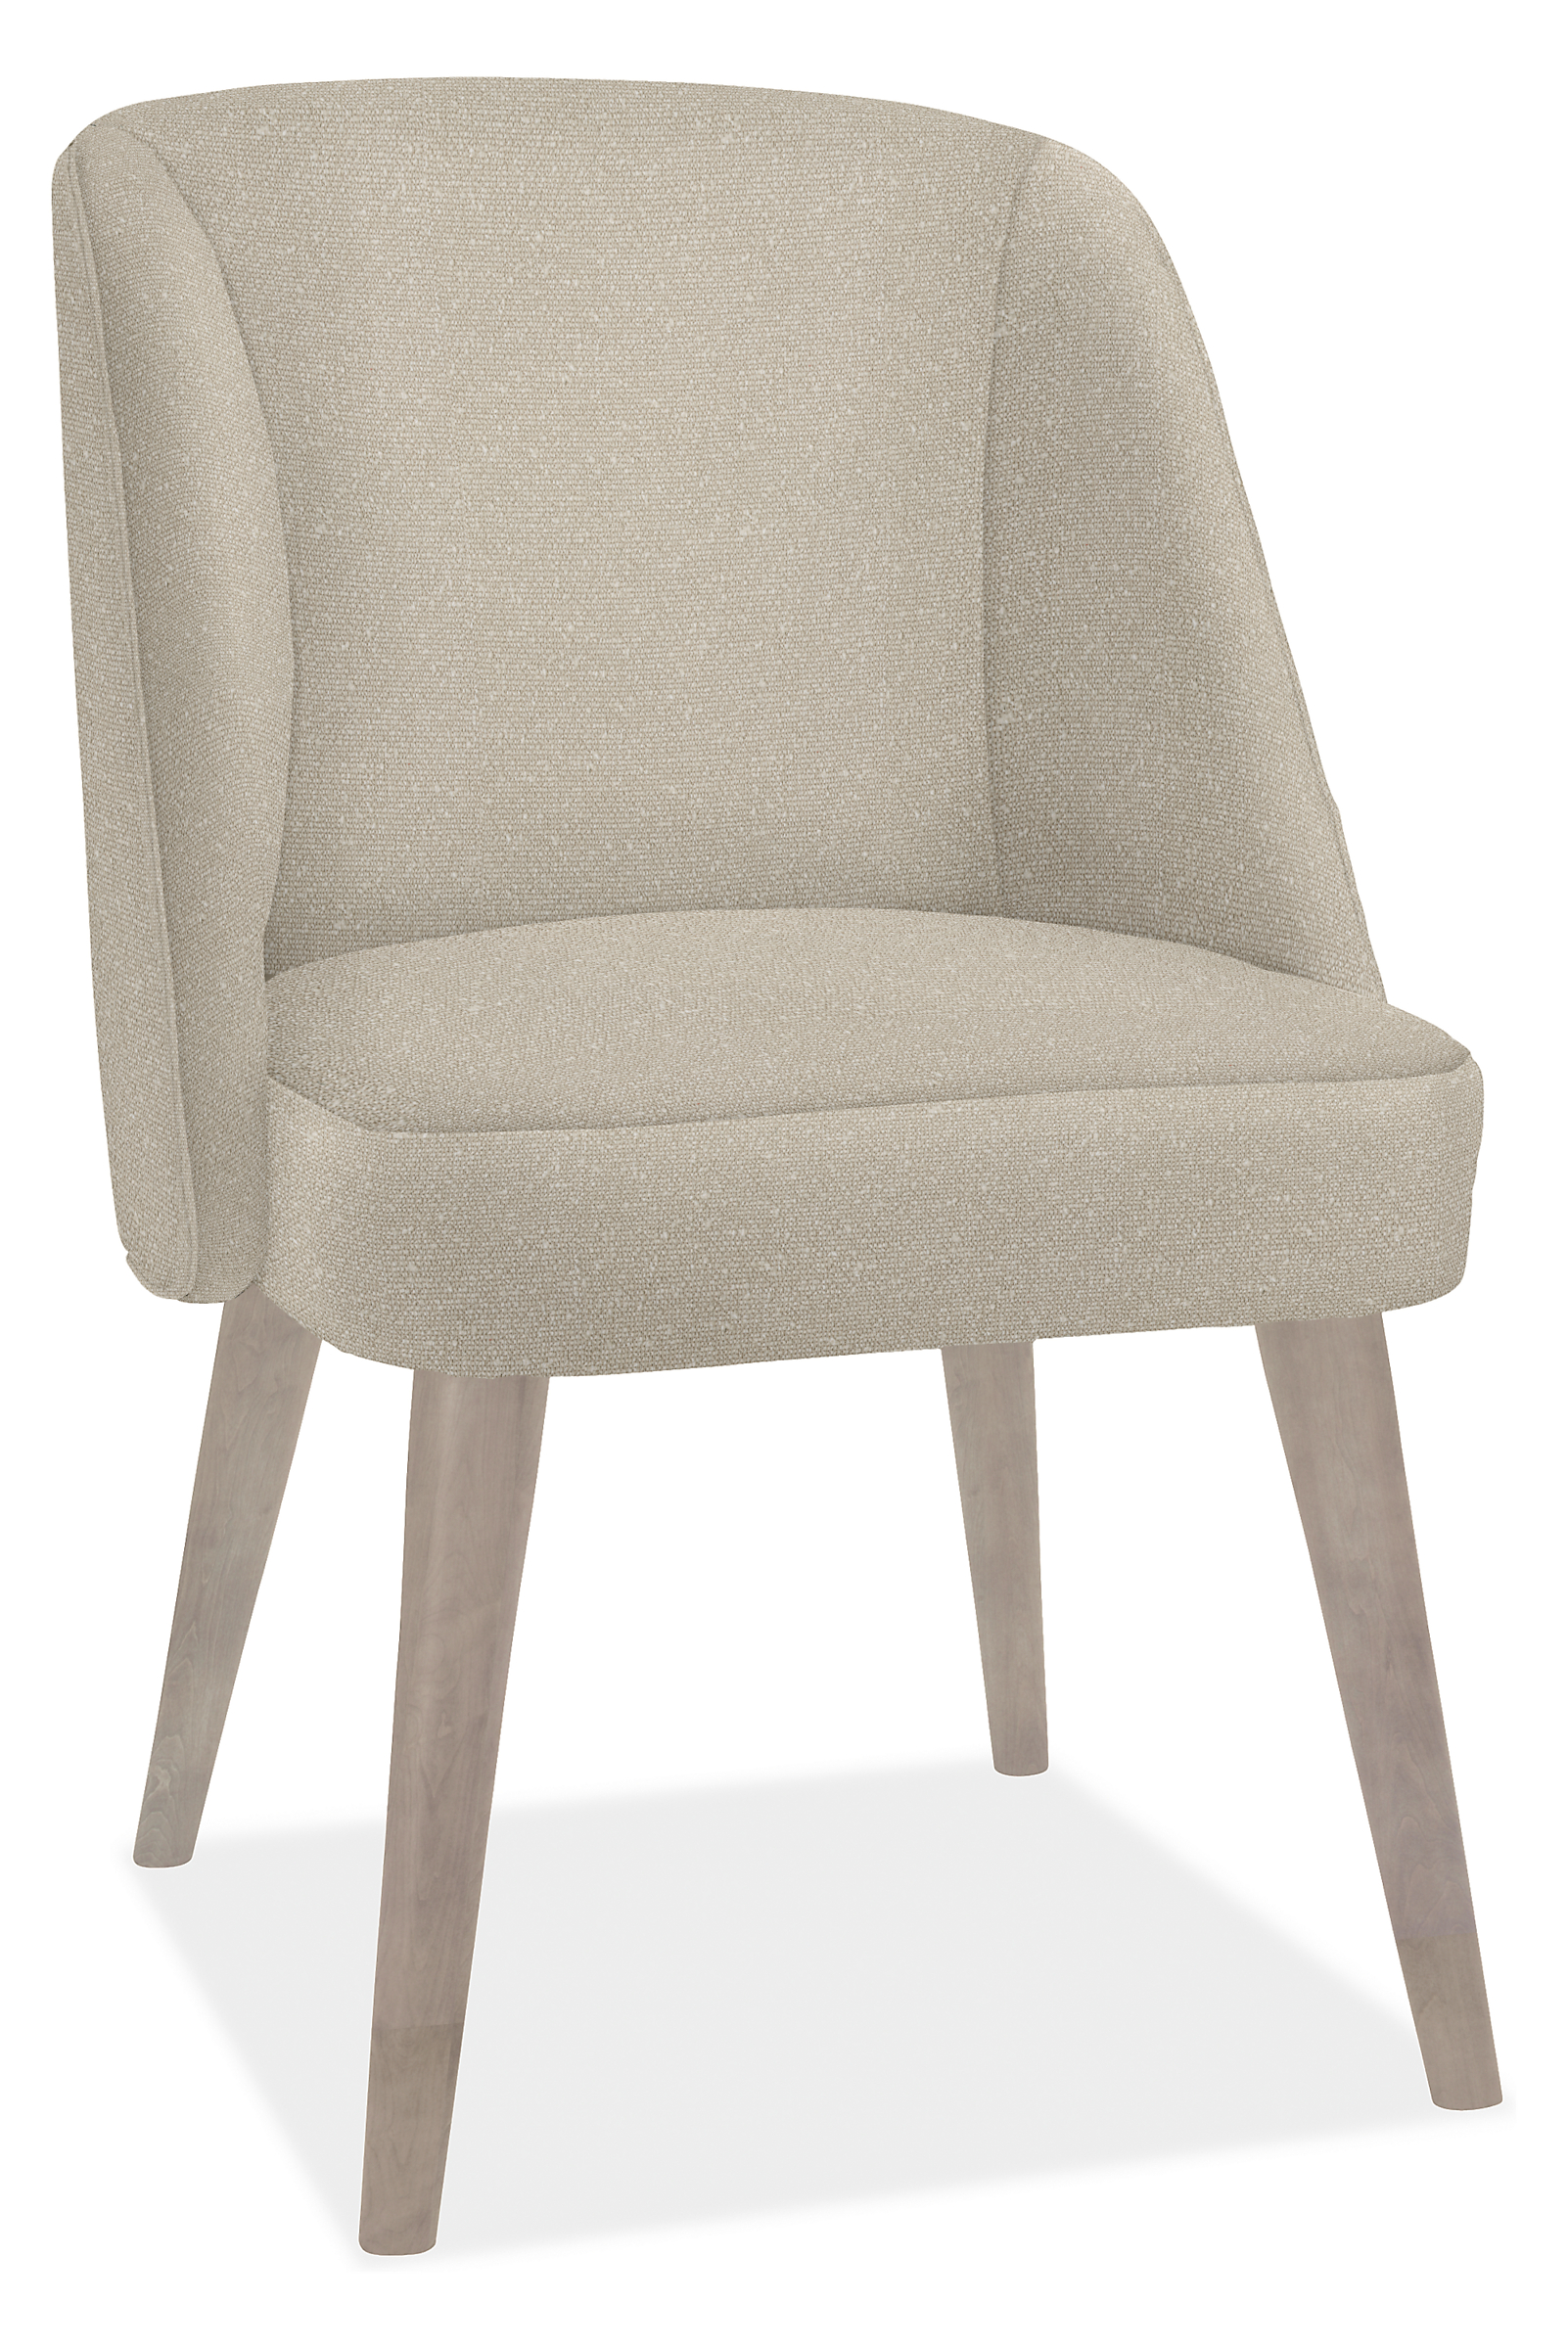 Cora Side Chair in Declan Natural with Shell Legs